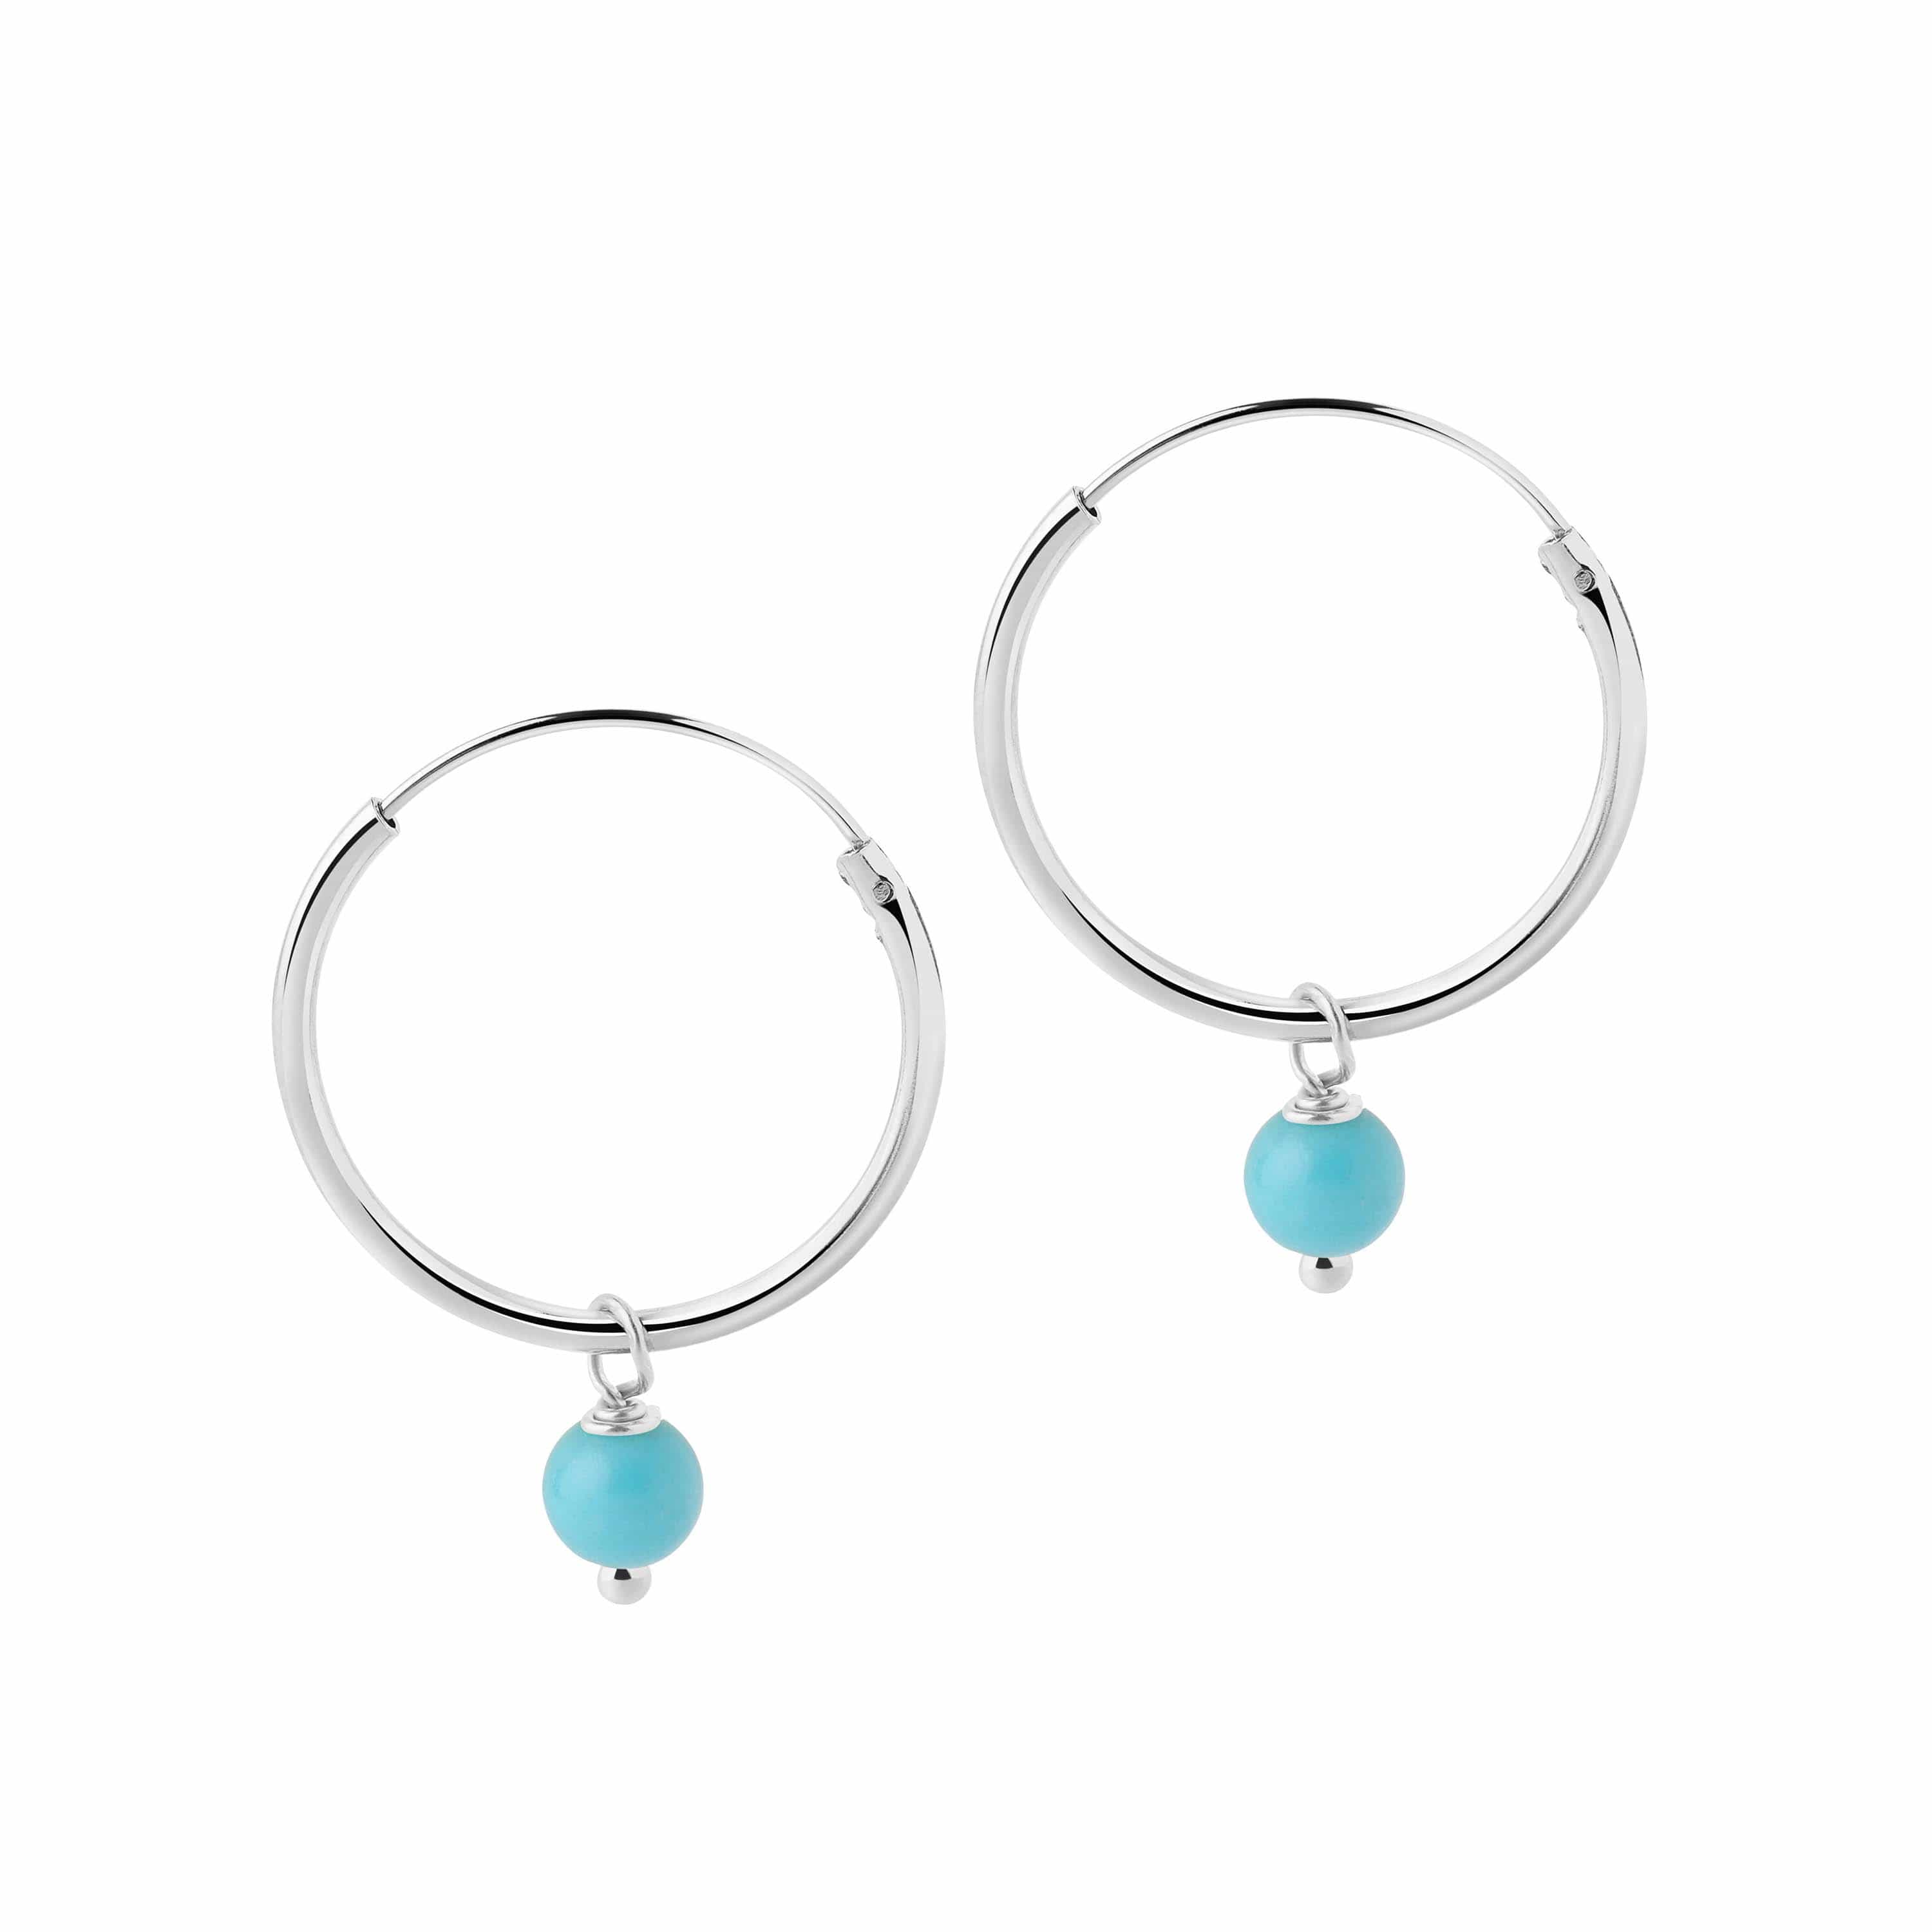 Gold Plated Hoop Earrings with Turquoise Blue Stone